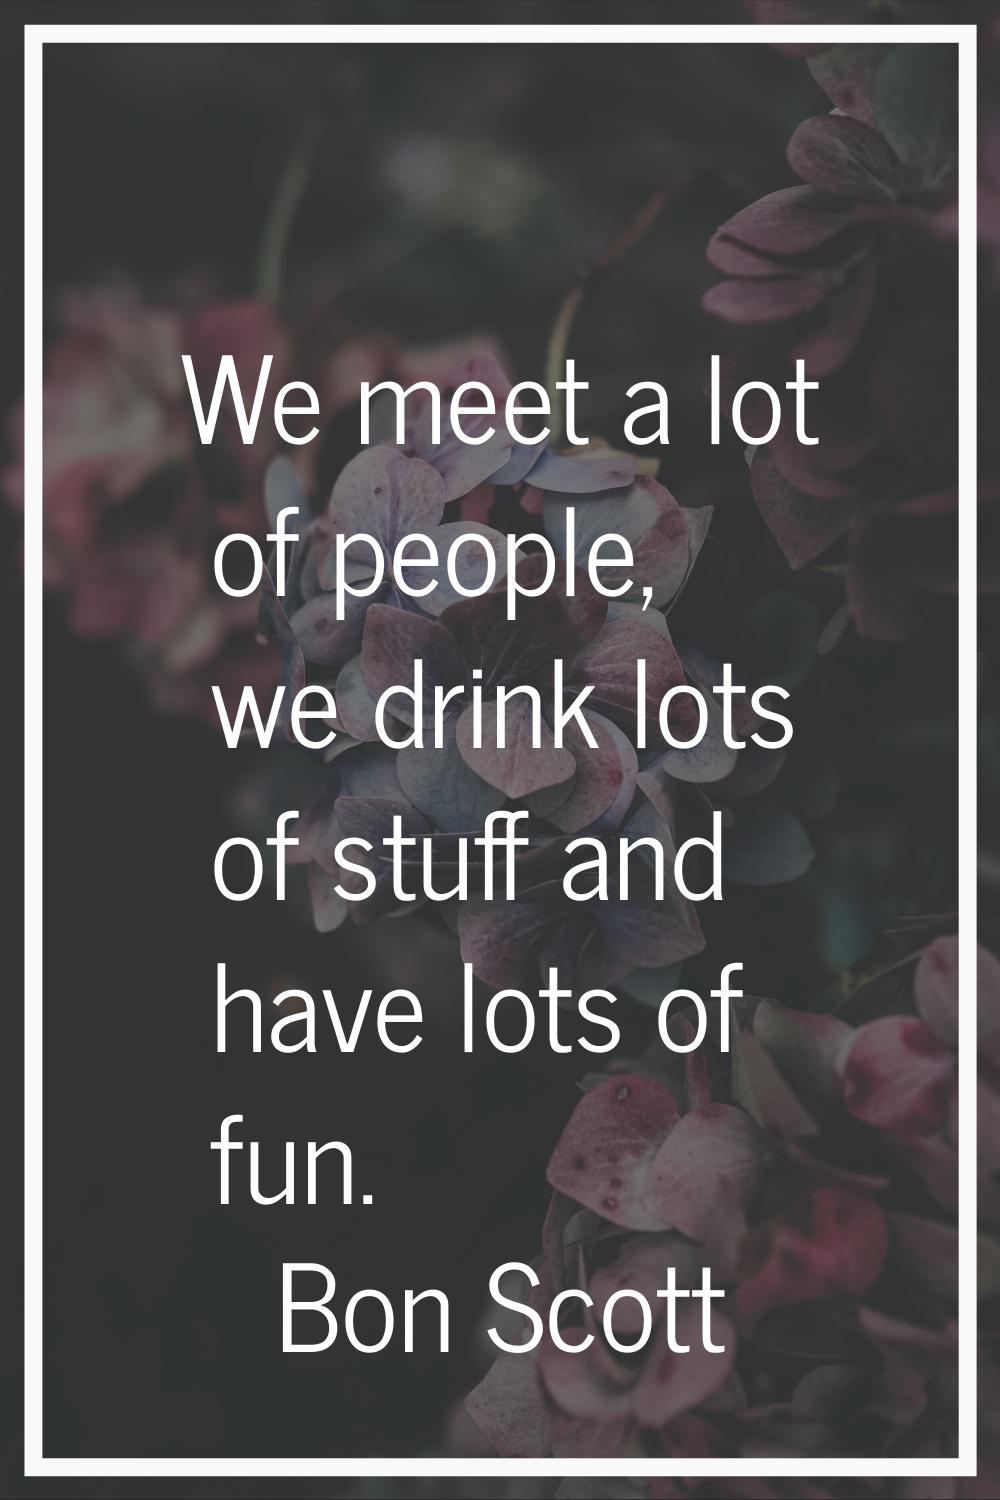 We meet a lot of people, we drink lots of stuff and have lots of fun.